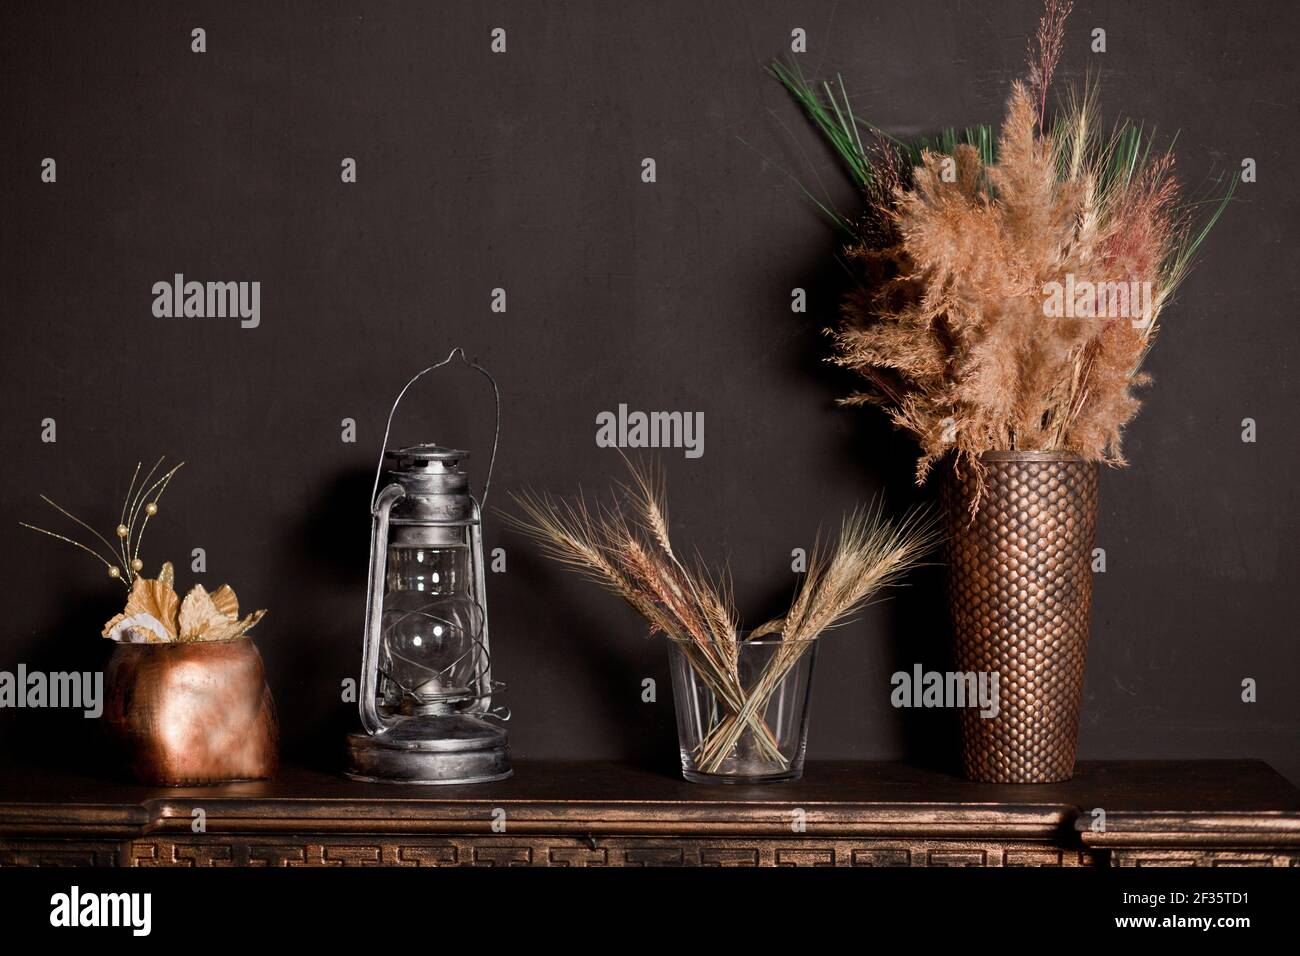 https://c8.alamy.com/comp/2F35TD1/wooden-shelf-with-different-home-related-objects-on-the-dark-wall-background-2F35TD1.jpg